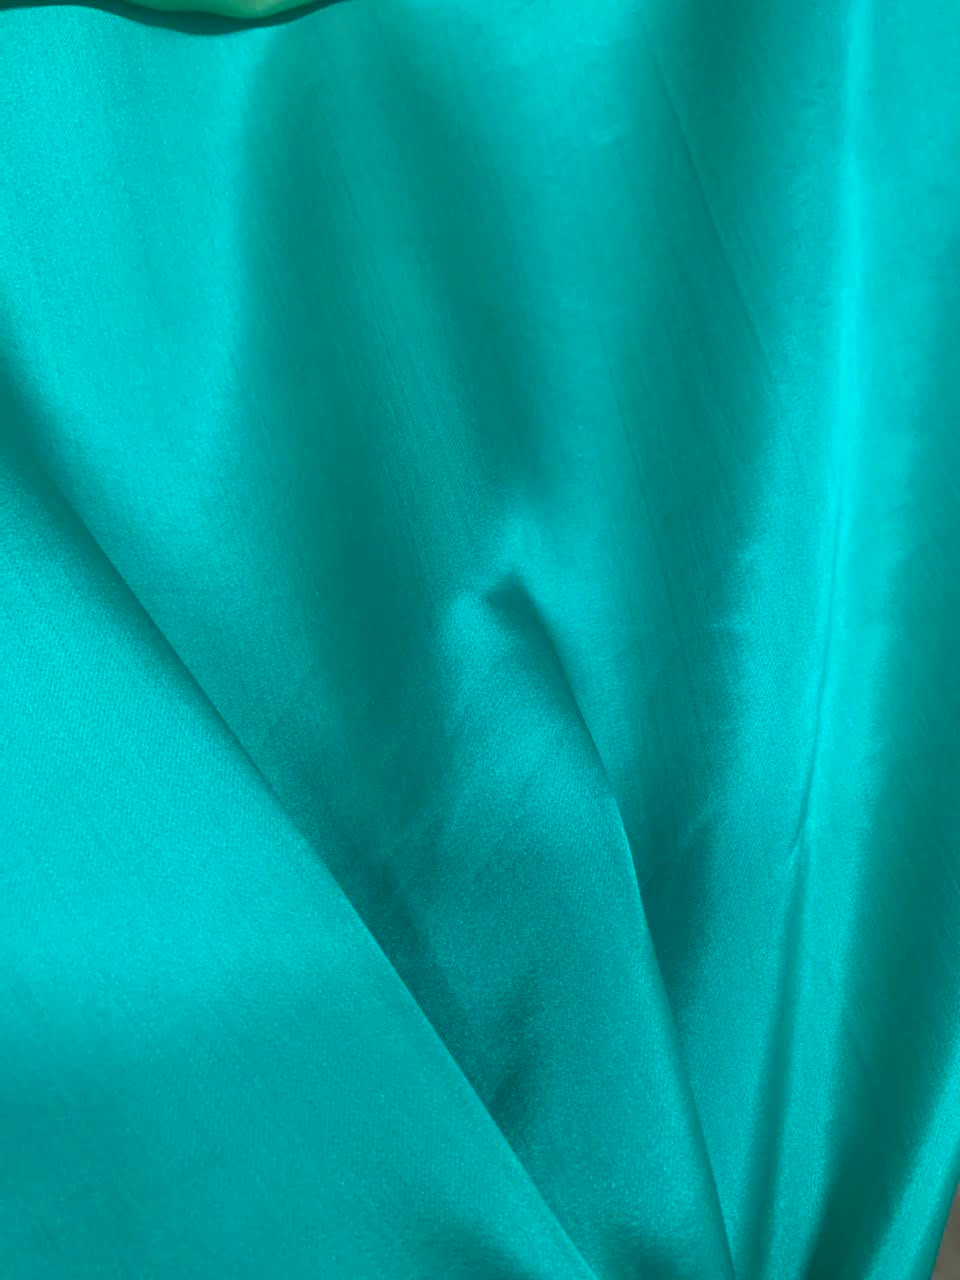 Turquoise Silk fabric by the yard - Natural silk - Pure Mulberry